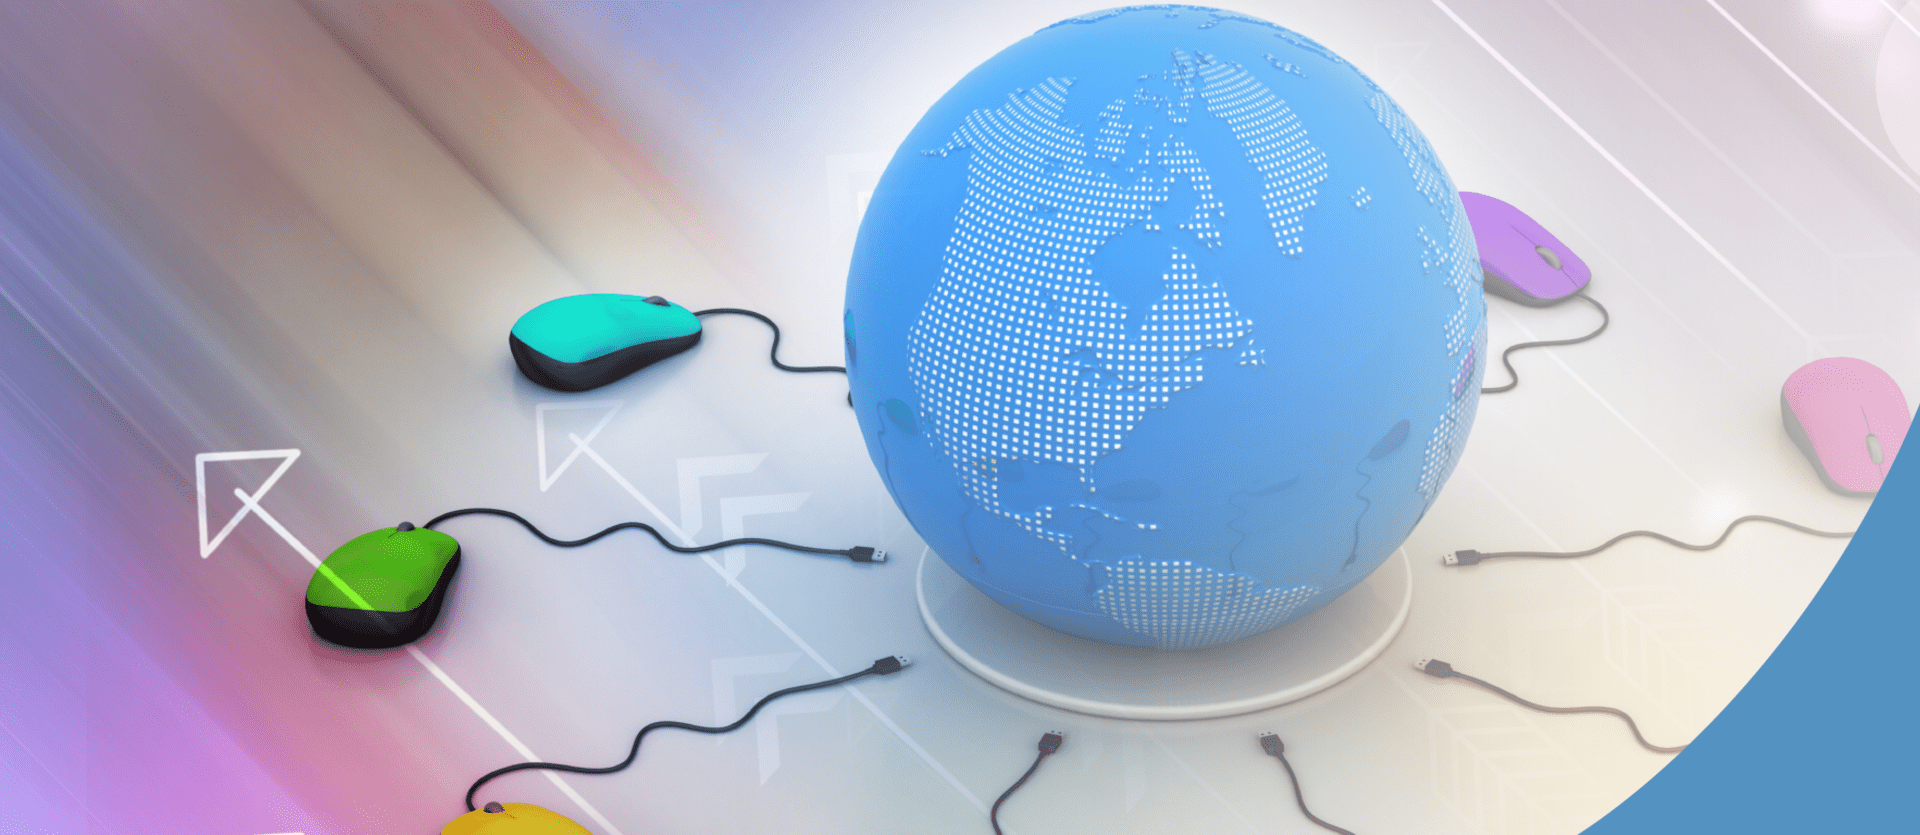 banner image with globe and computer mouses